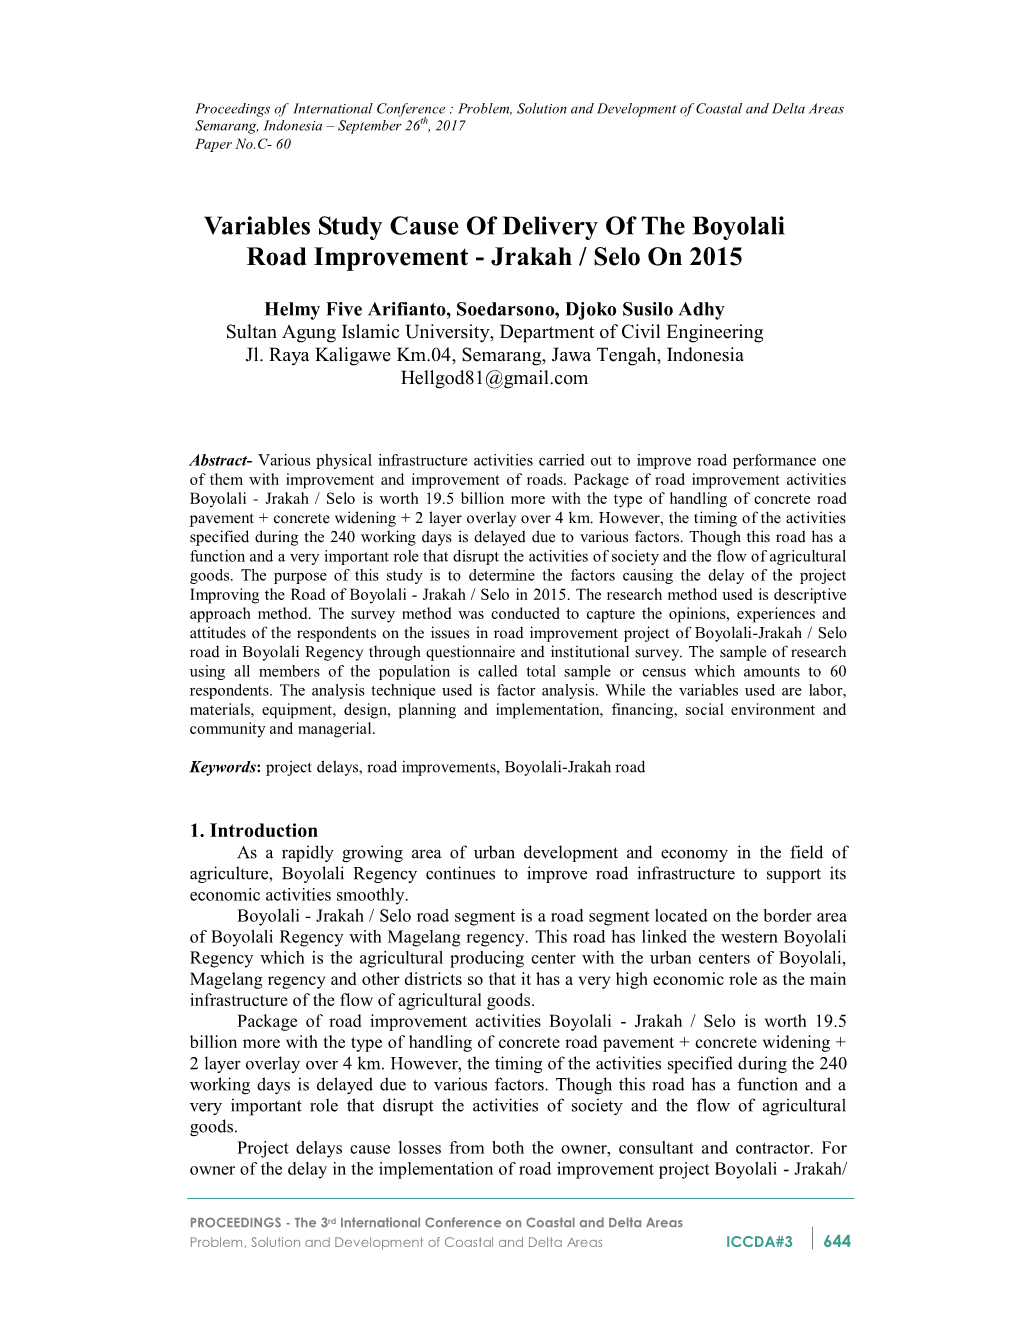 Variables Study Cause of Delivery of the Boyolali Road Improvement - Jrakah / Selo on 2015